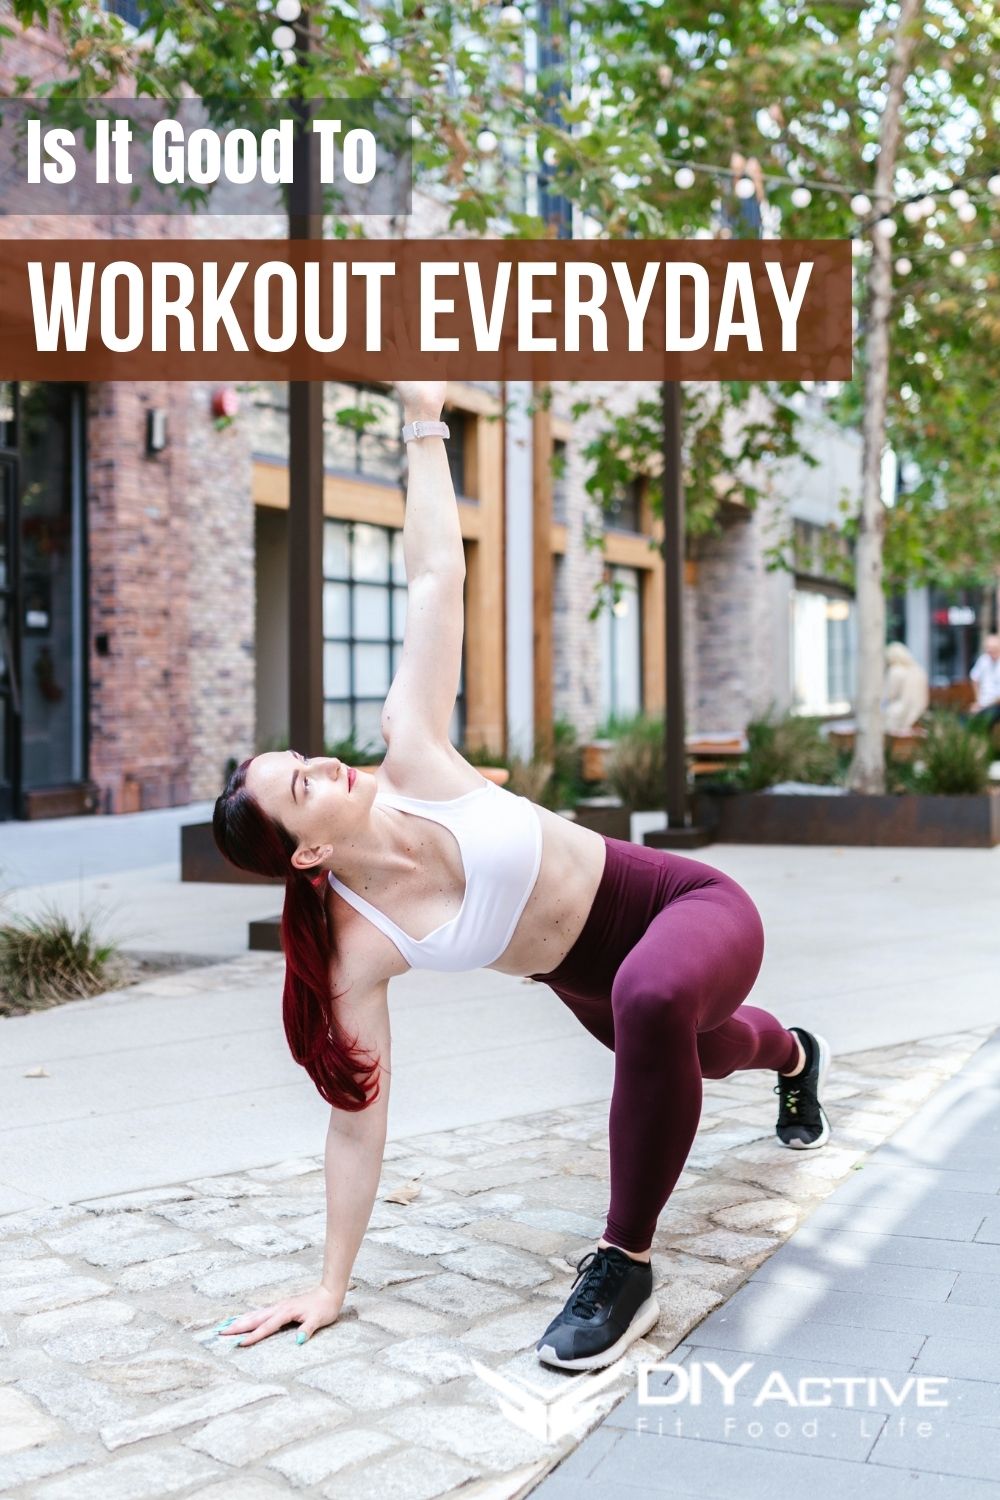 Is It Good to Workout Every Day?